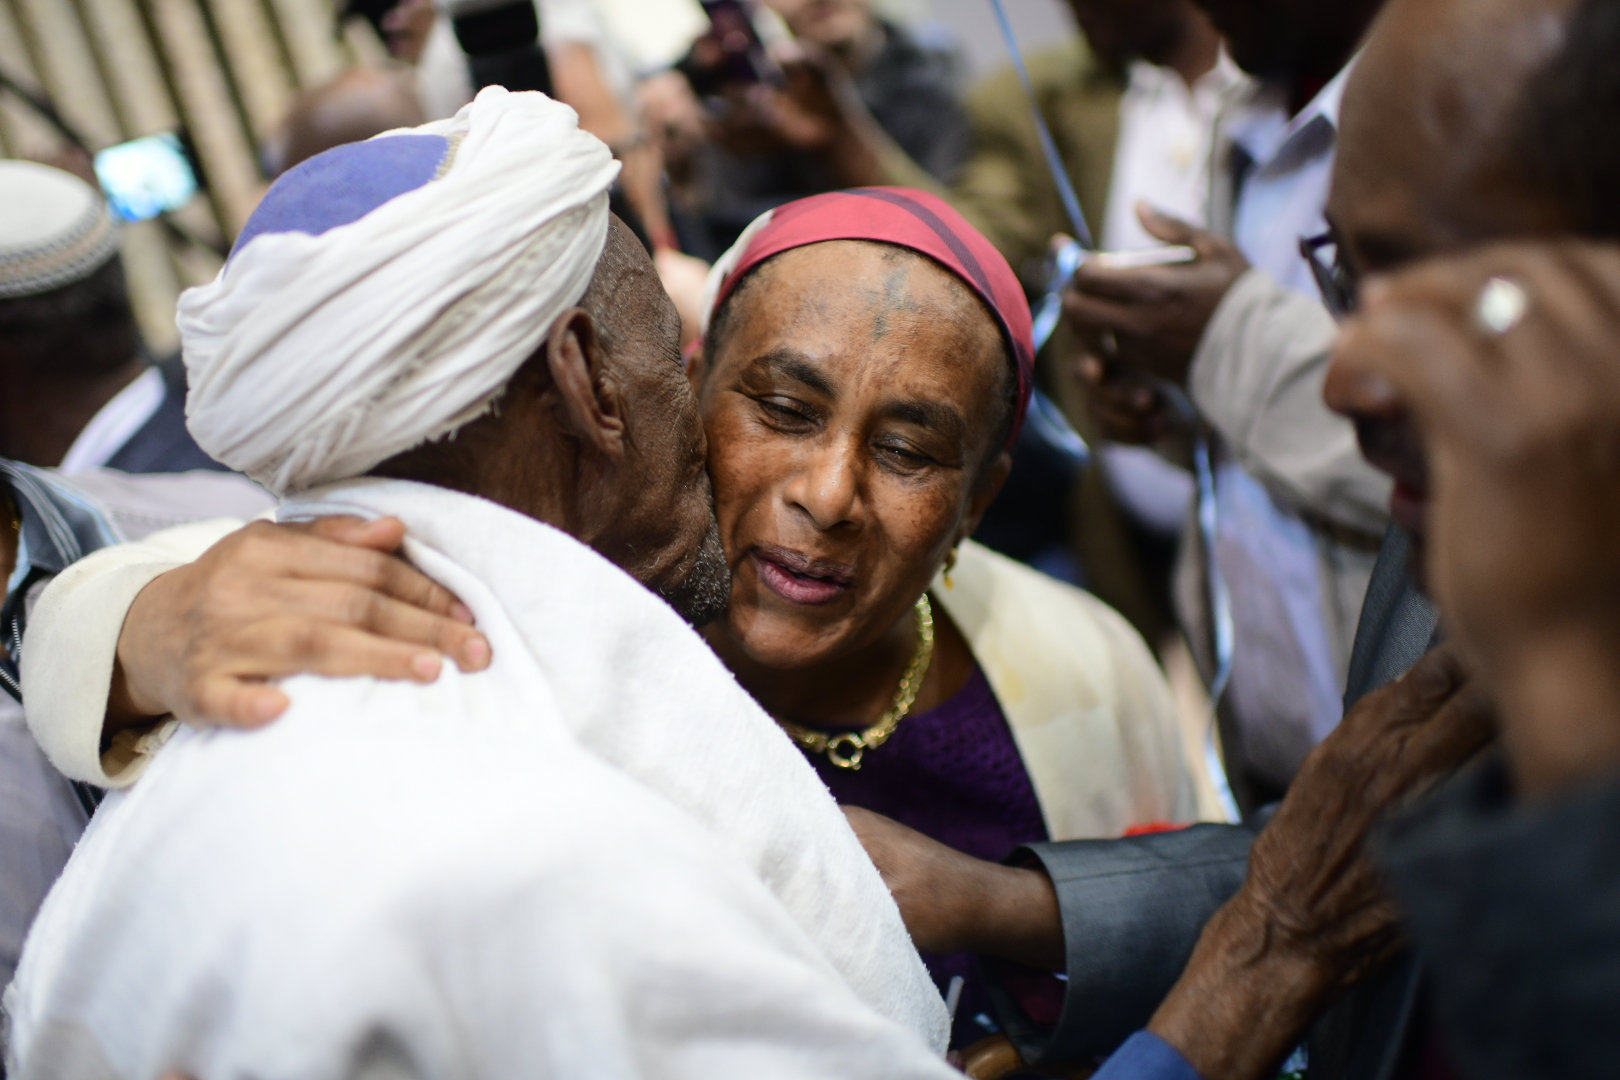 Cabinet Approves Plan To Bring 400 Ethiopian Jews To Israel The